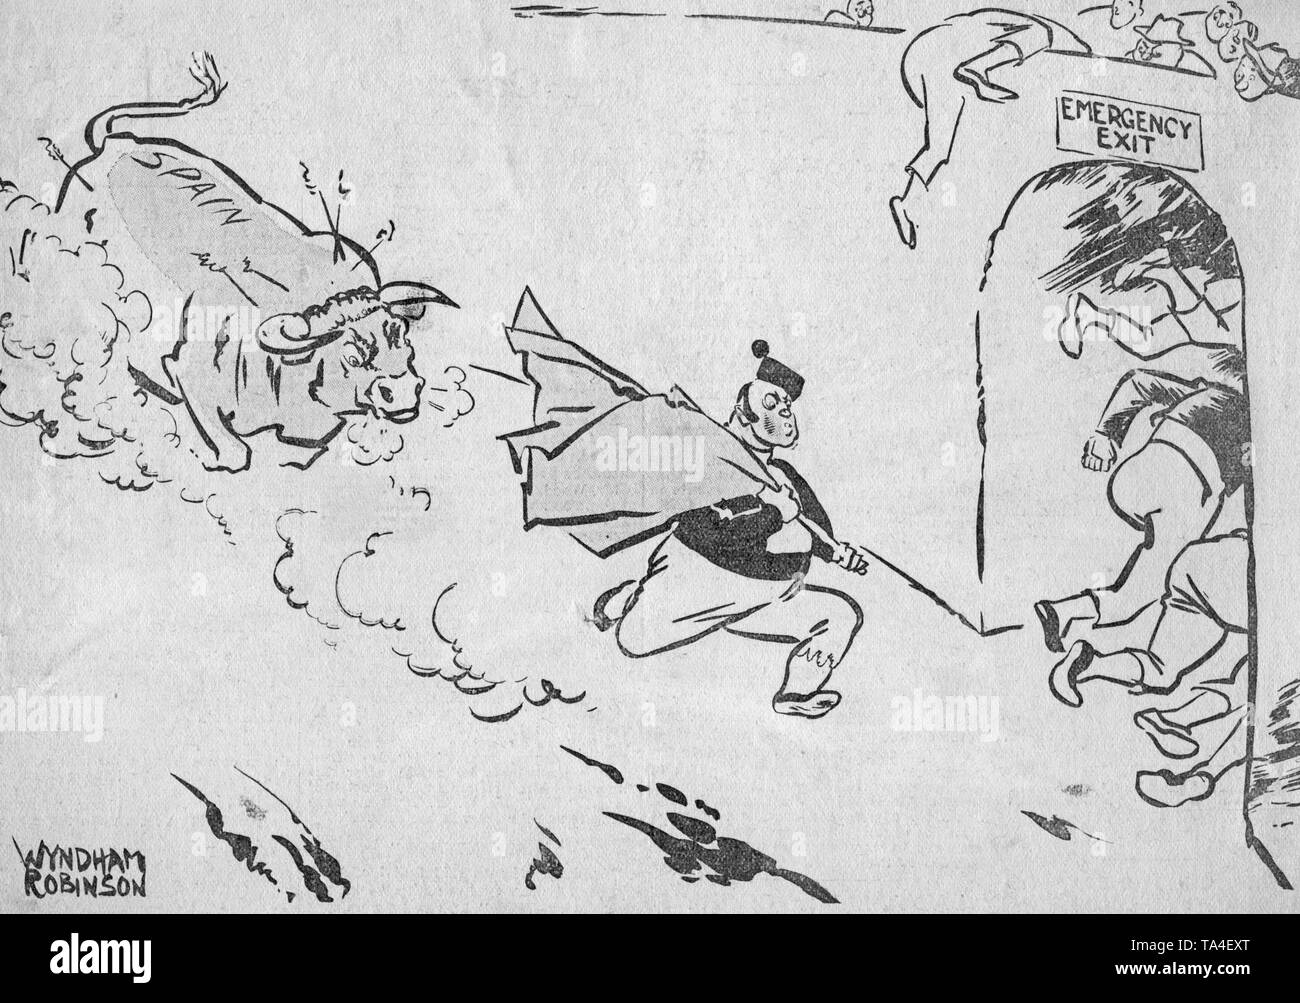 Undated print of a caricature of the Spanish Civil War and the offensives of the Spanish national troops by the British cartoonist Wyndham Robinson (born 1883) under the title 'The Red Flag and the Bull', 1936. The caricature depicts a wild Spanish bull that is chasing out a torero with a red cloth (Republic, Communists) from the arena through an emergency exit. Robinson worked for the 'Morning Post' in London, and was known for his anticommunist drawings in the 1930s. Stock Photo